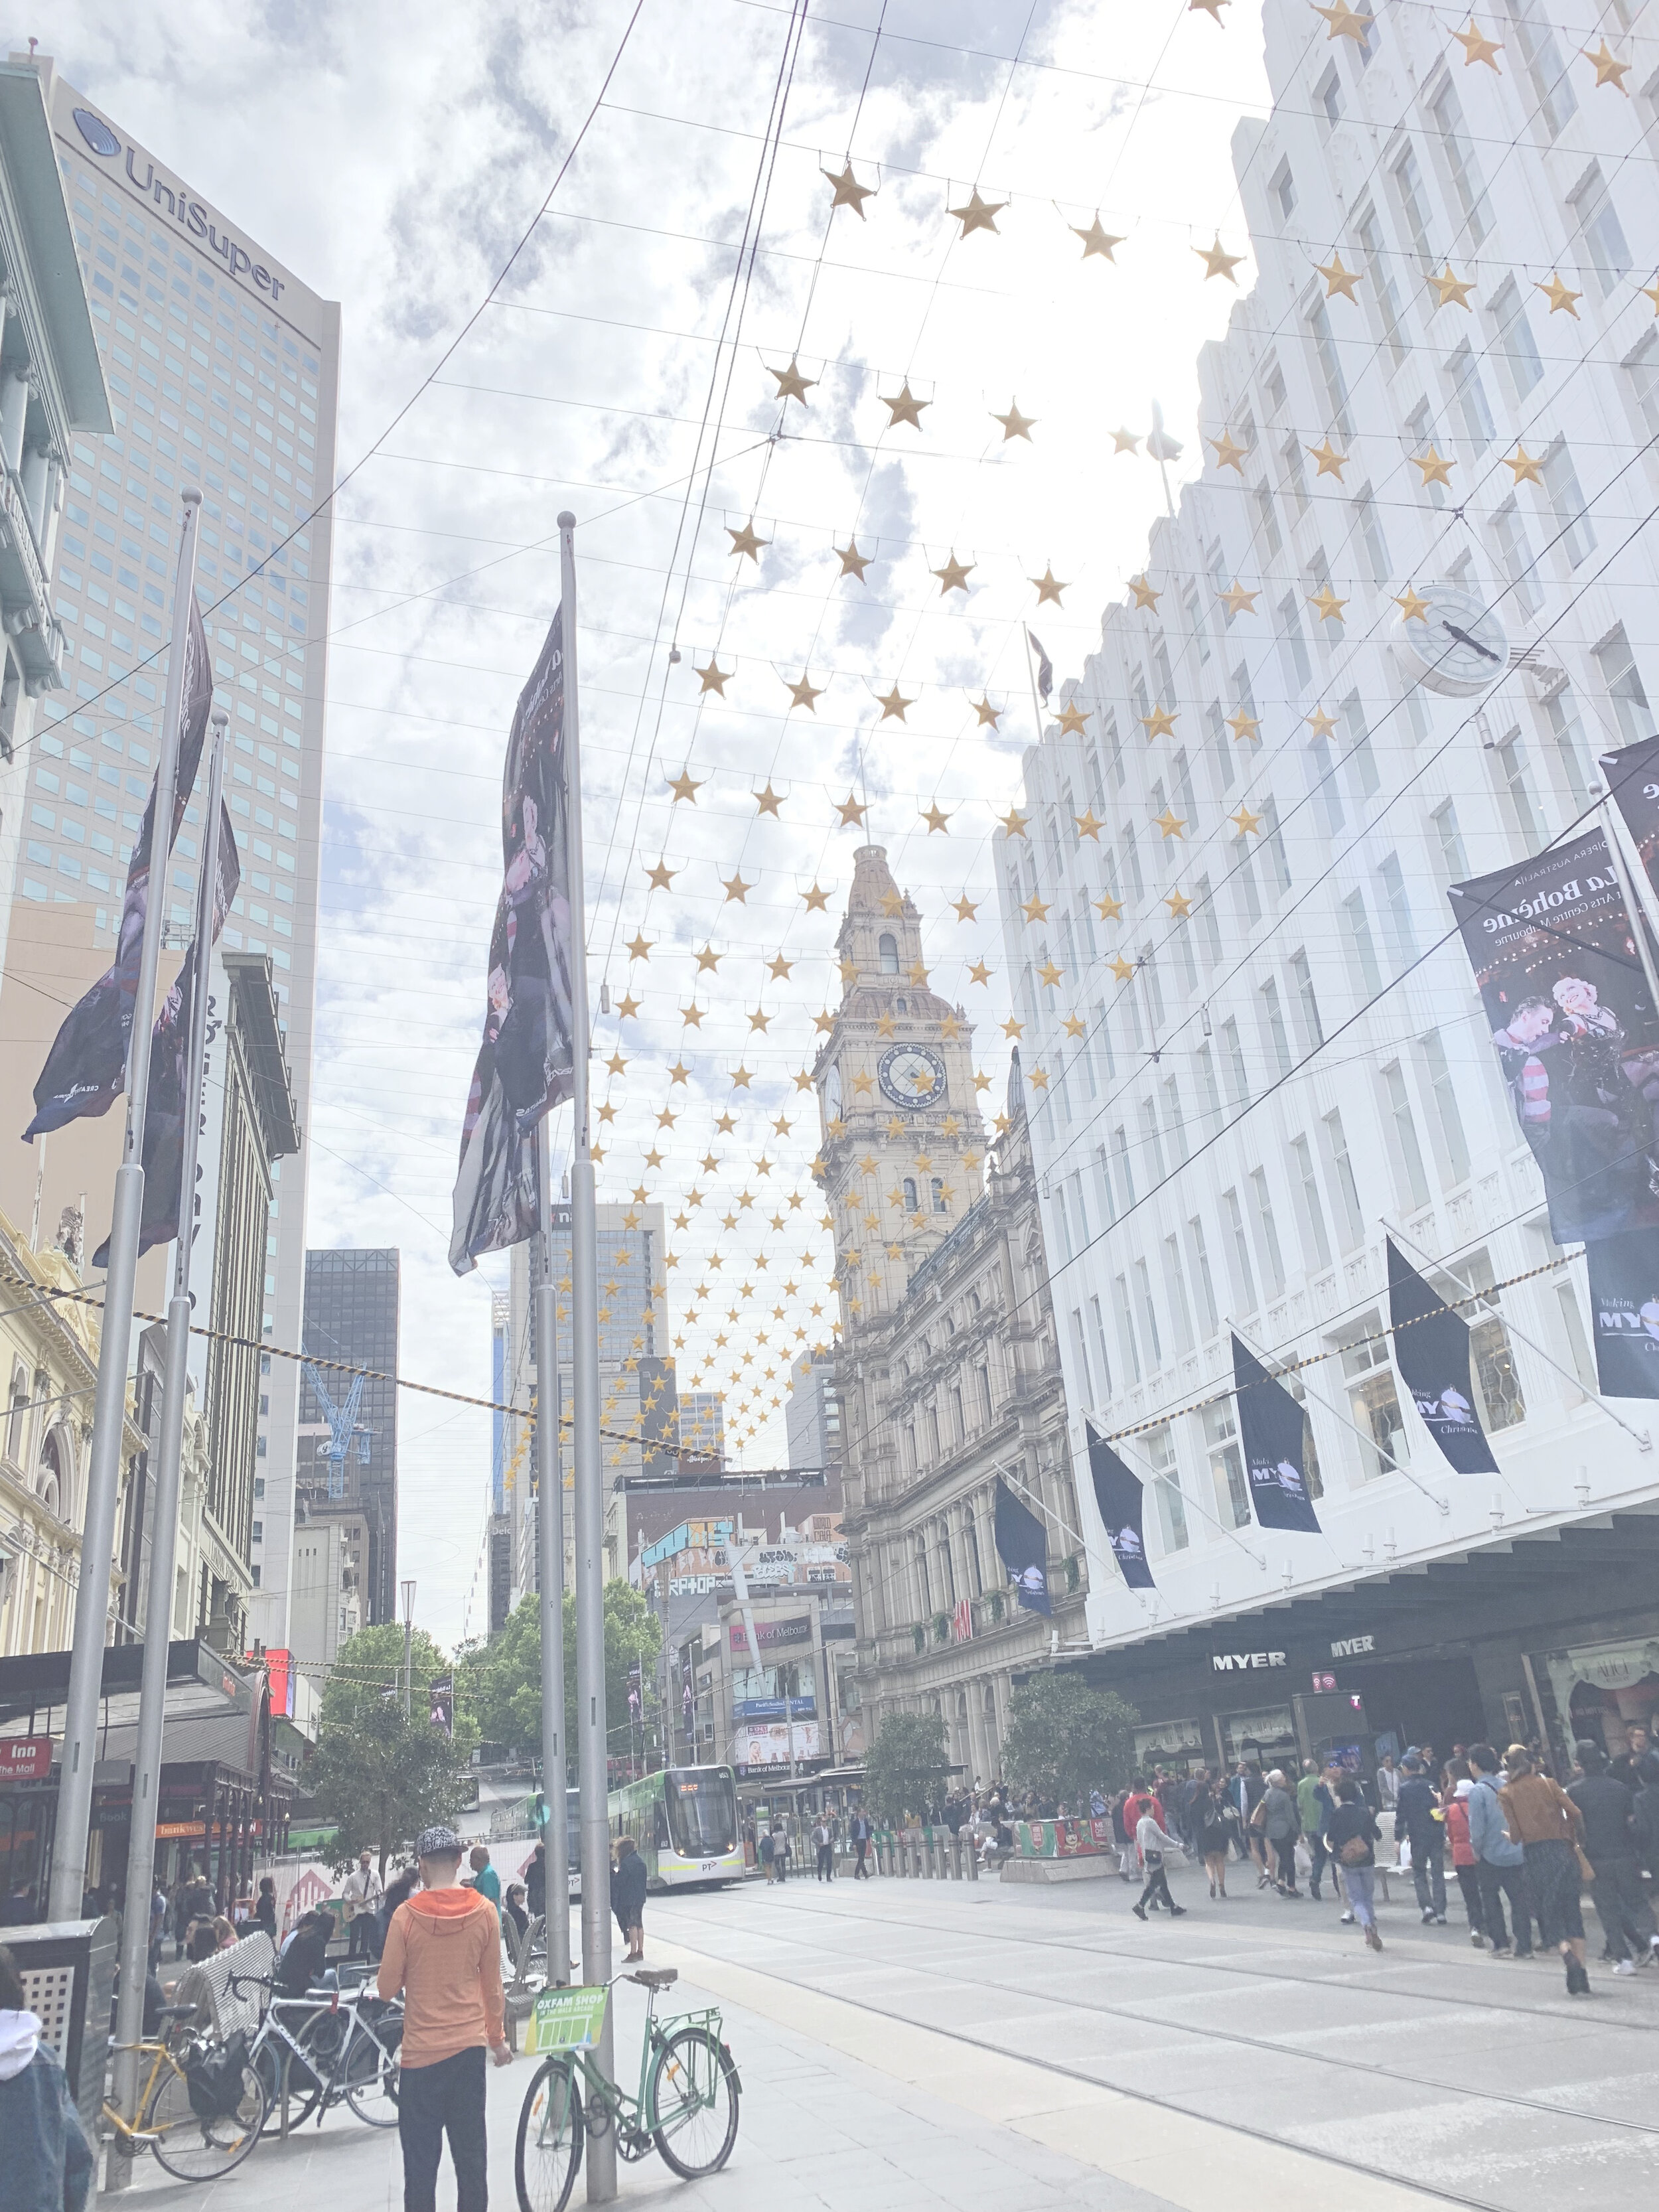 Coffee, drinks, and lots of shopping in Melbourne | Travel Diary